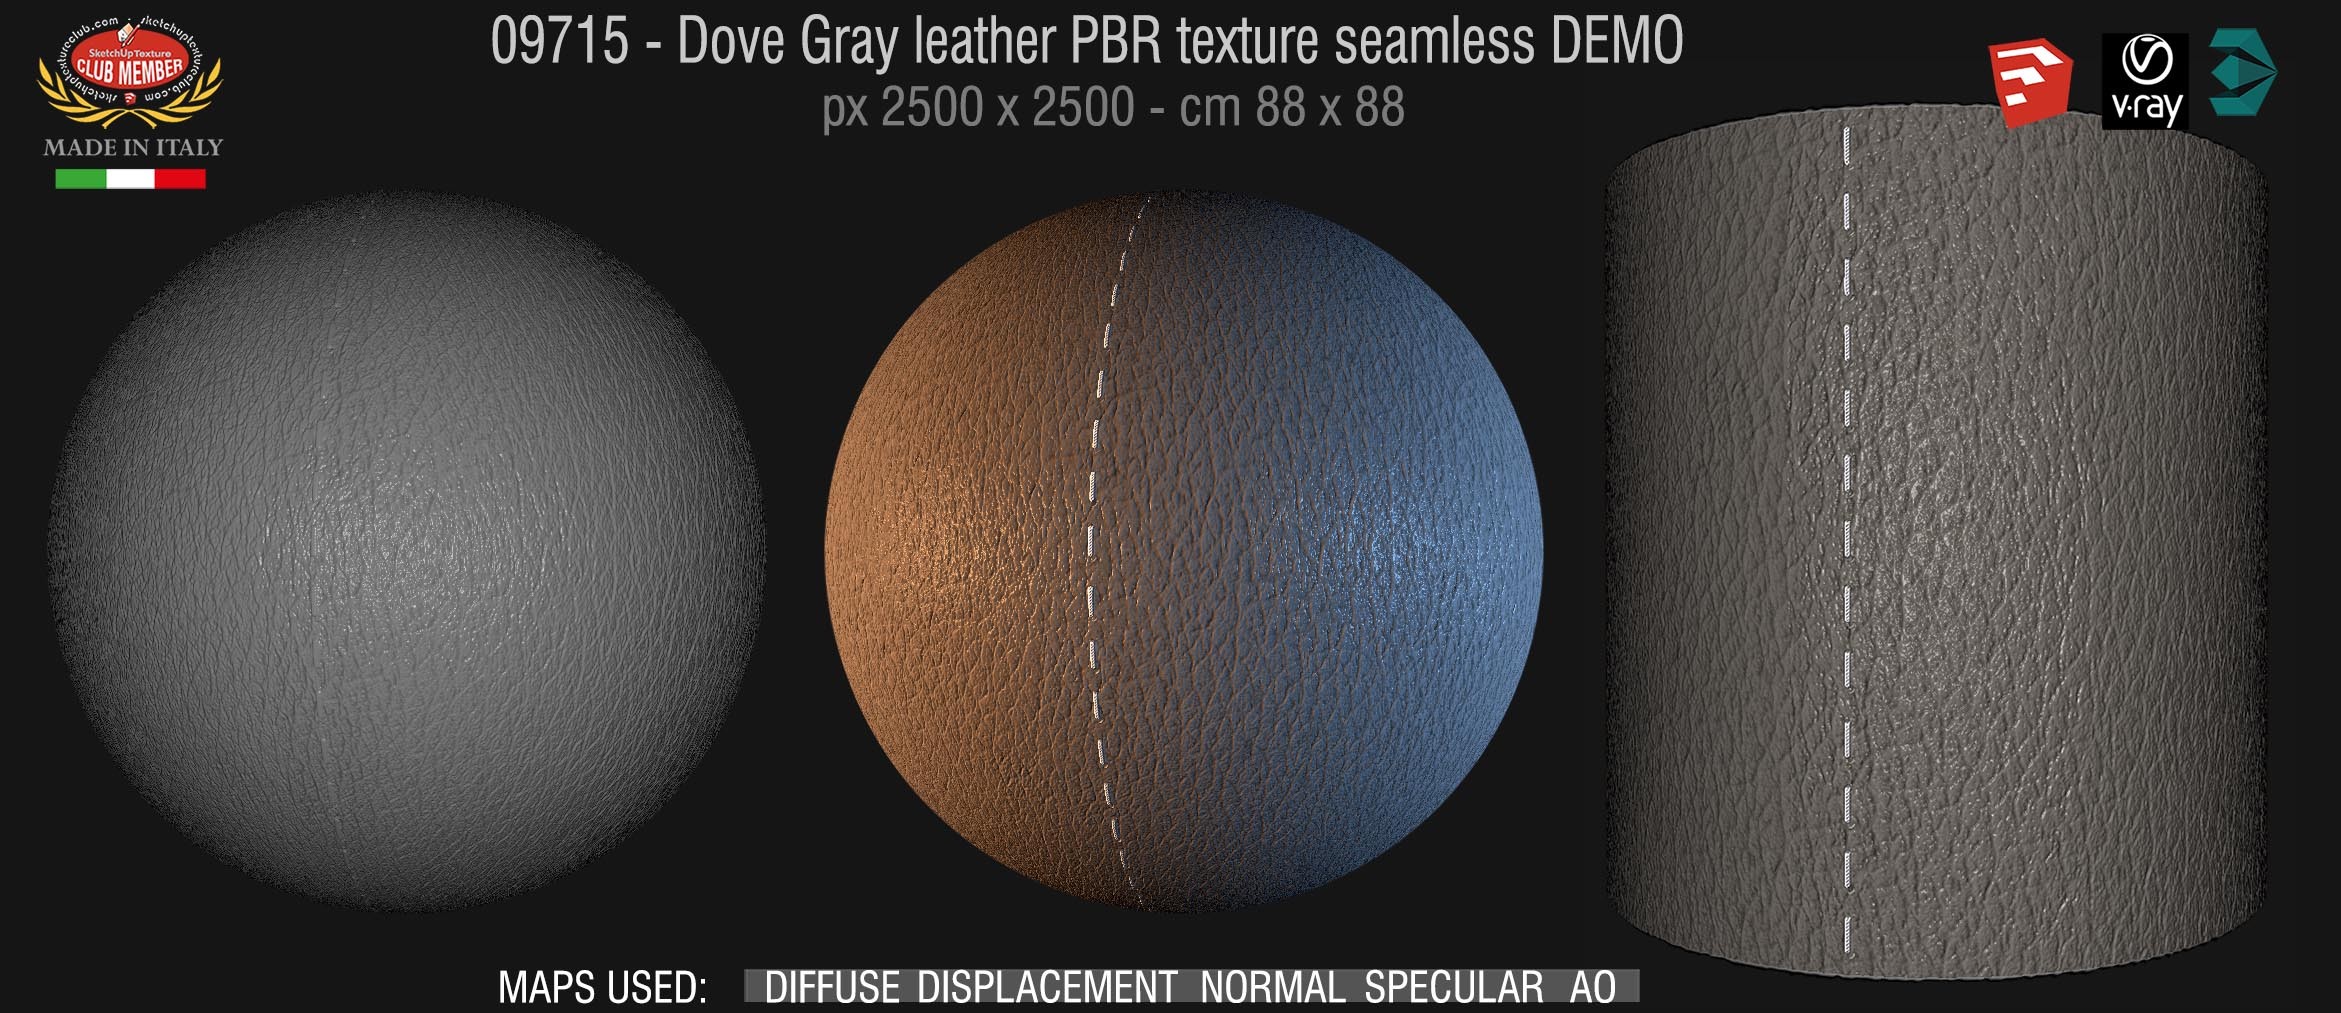 09715 Dove Gray leather PBR texture seamless DEMO